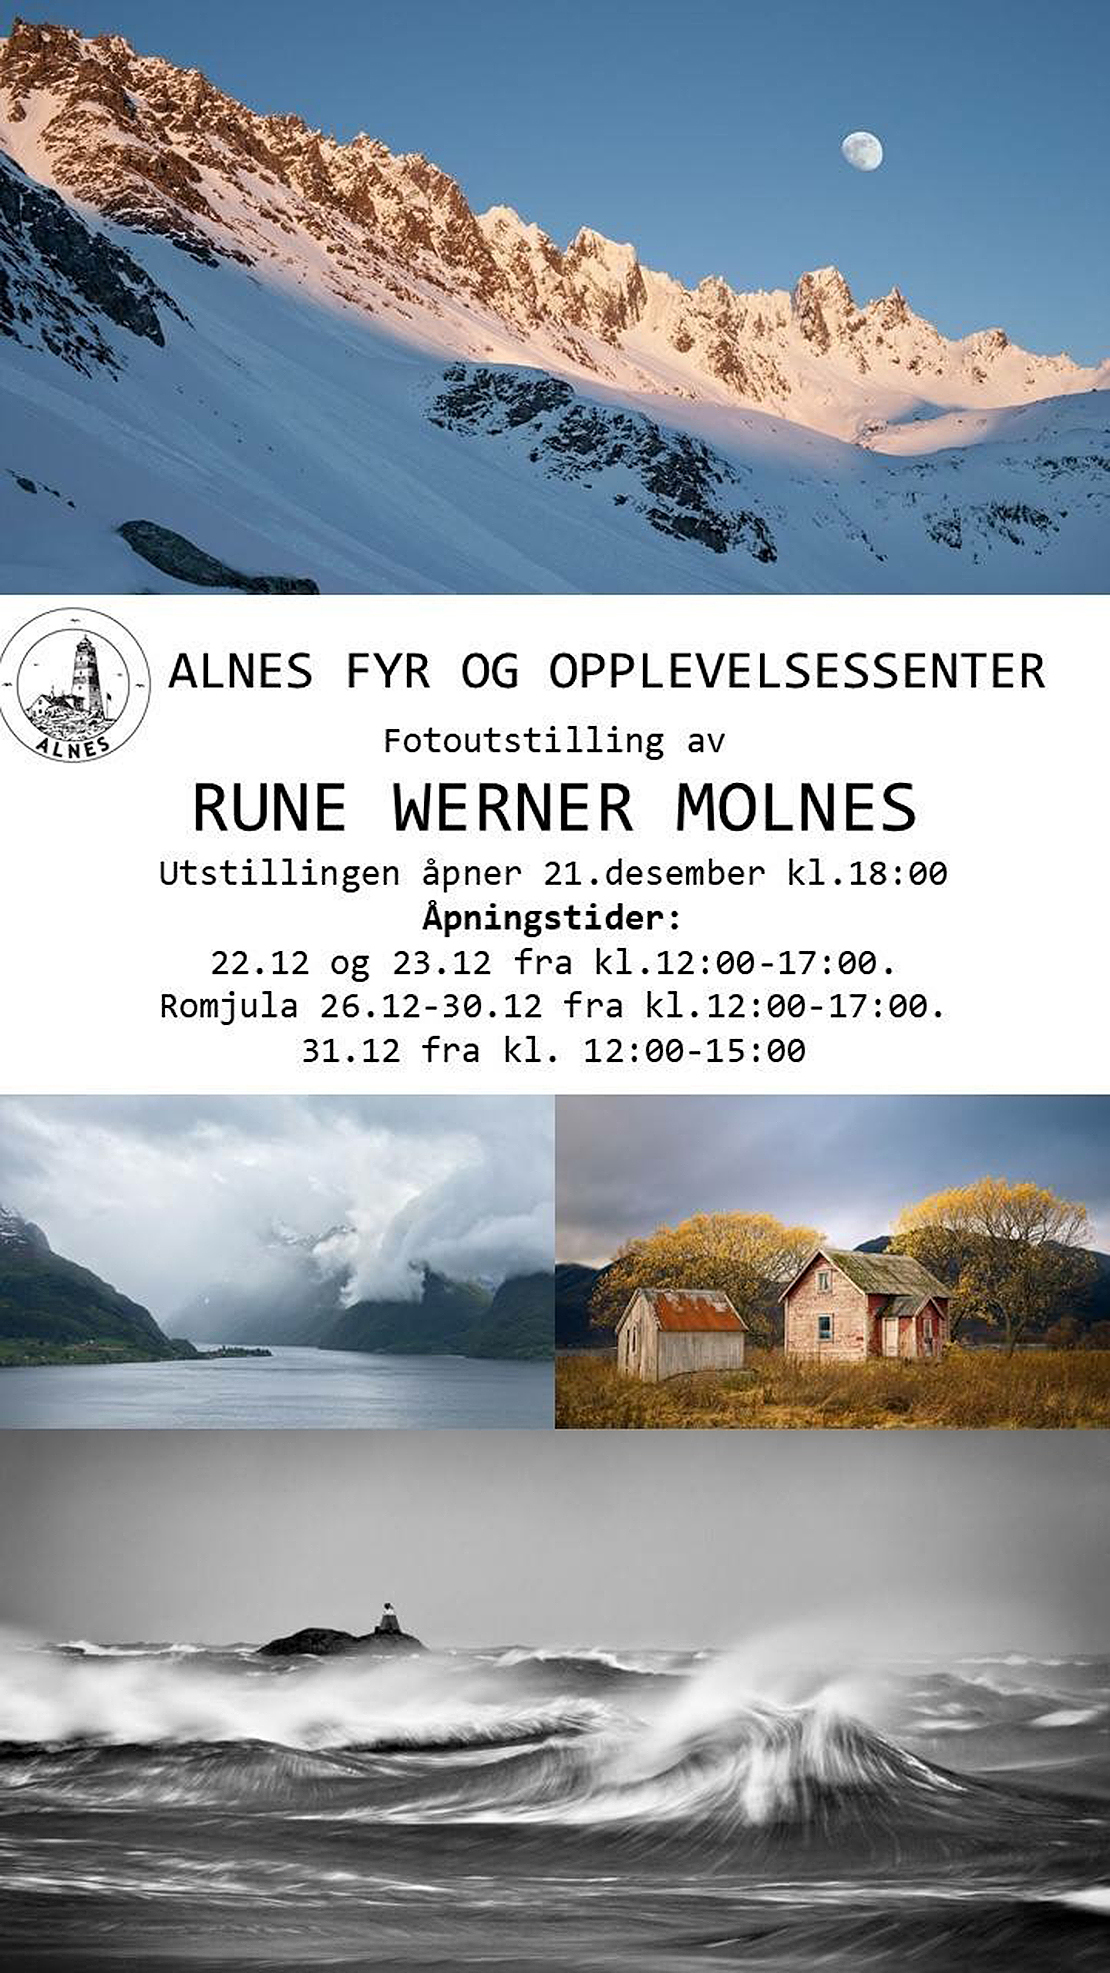 The poster, where you'll find opening hours. PS! There will be no work in the tunnel out to Godøy from December 21st at 16:00 - January 2nd at 12:00.